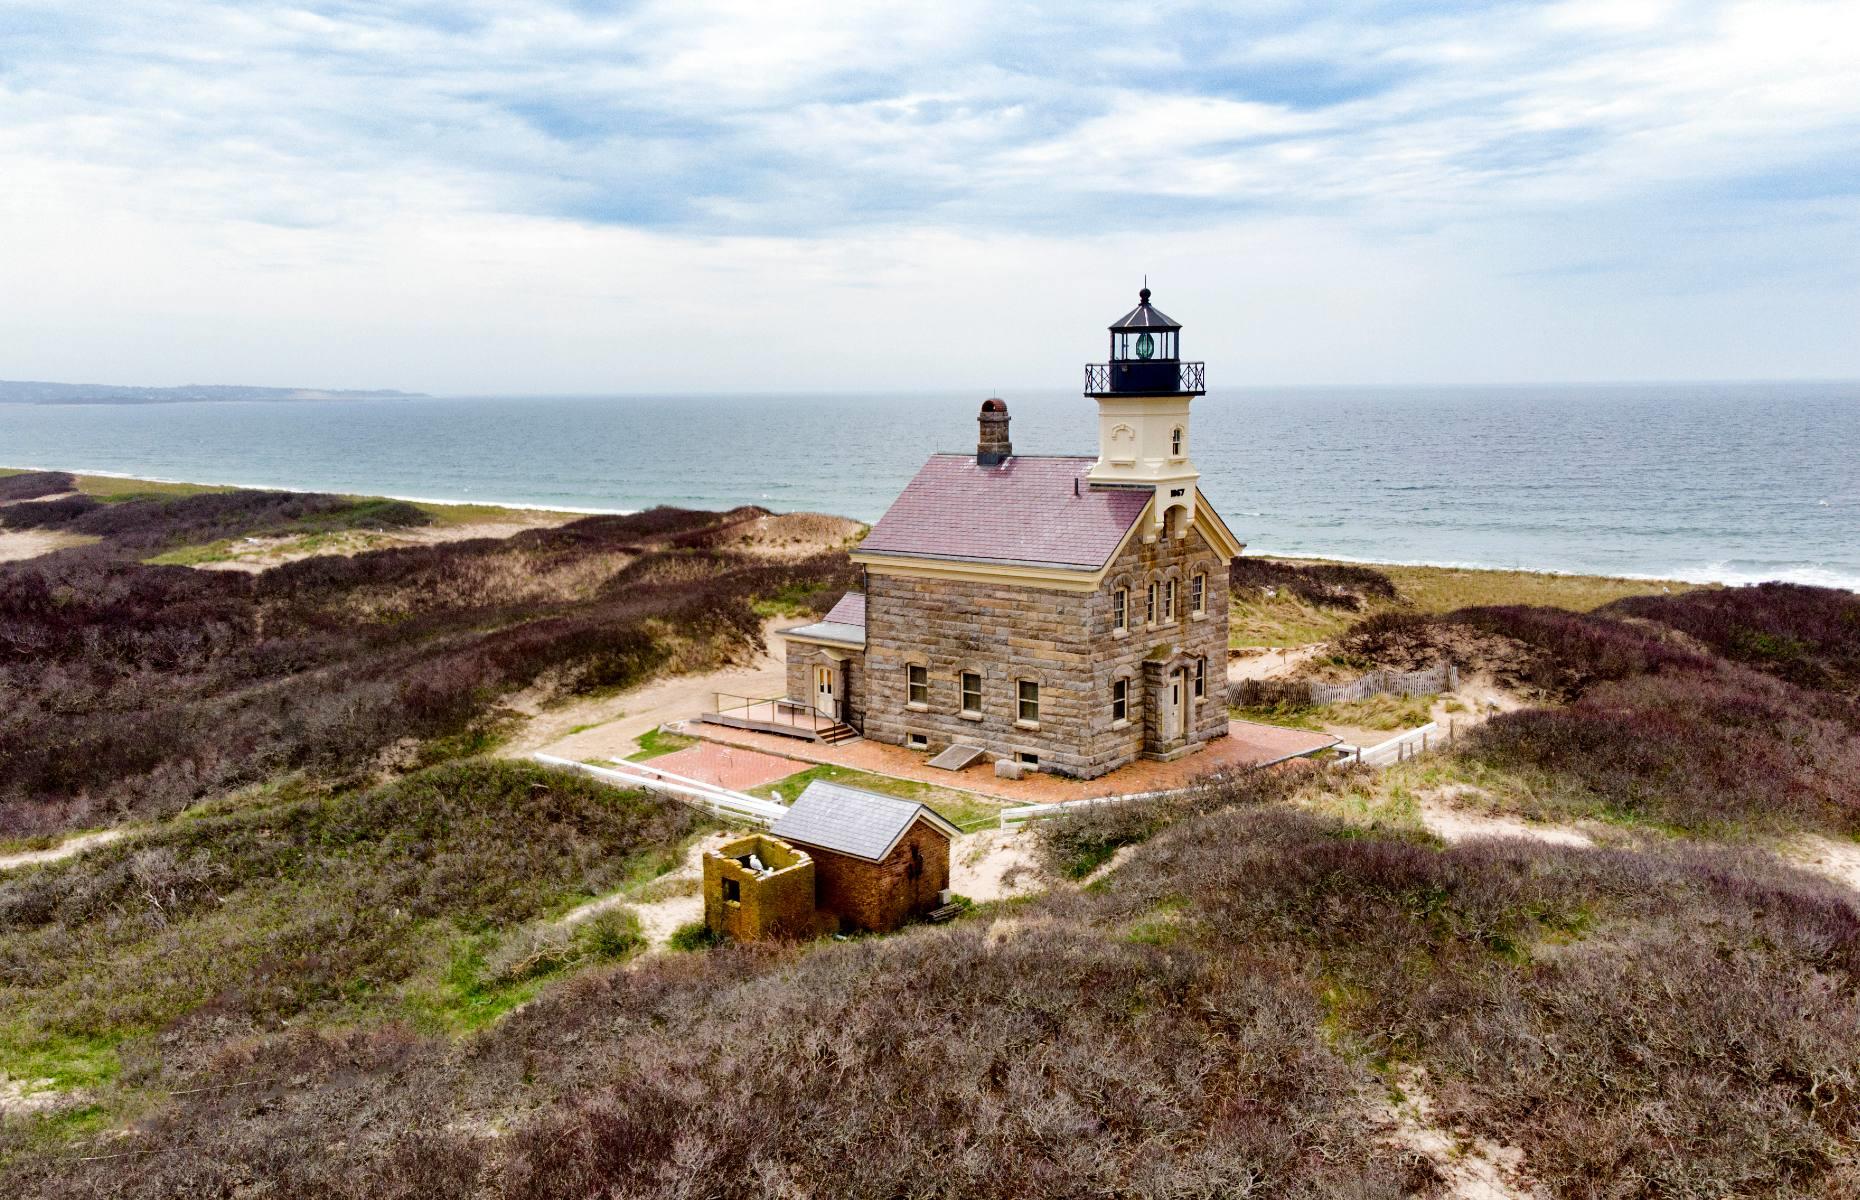 This under-the-radar spot lies off the coast of Rhode Island and is a dreamy combination of unspoiled beaches, tall bluffs, freshwater ponds and lush hills carpeted by a rainbow of wildflowers. Around 1,000 people live on Block Island but its New England charm, colorful shopfronts and numerous art galleries, as well as its natural beauty, bring thousands of visitors to its shores each day.